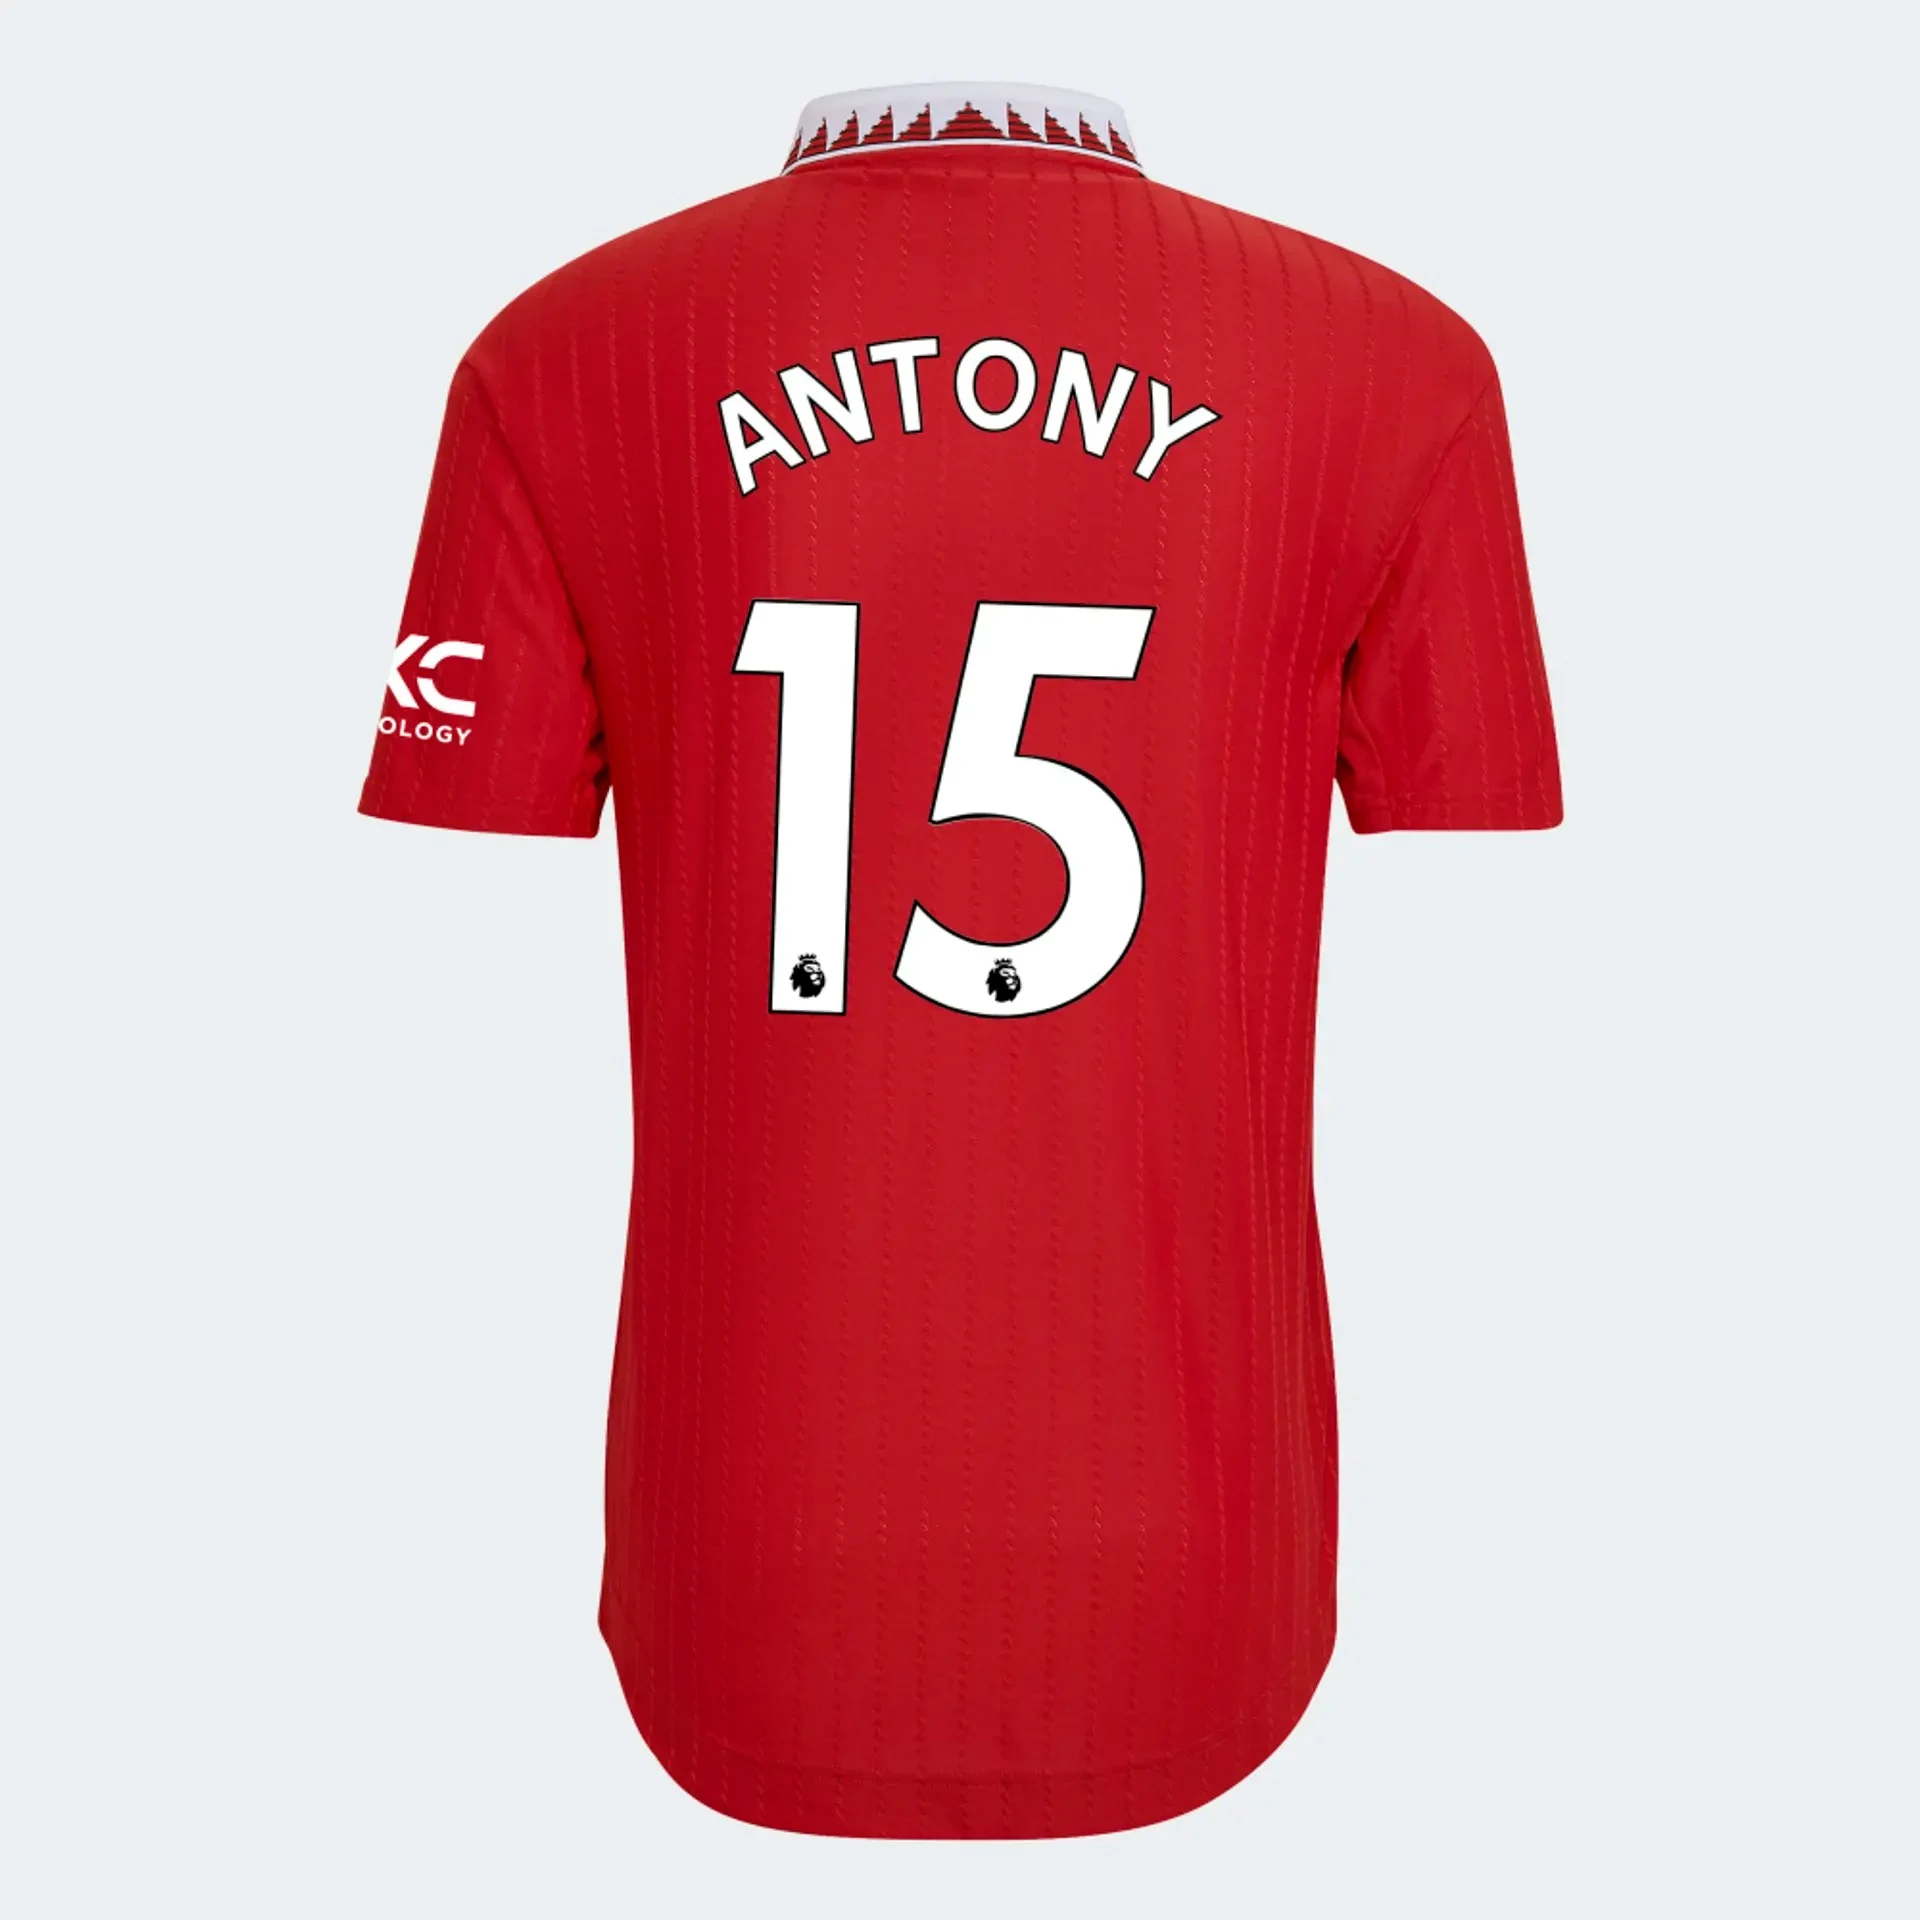 5 shirt numbers Man United can offer to Antony - in pictures